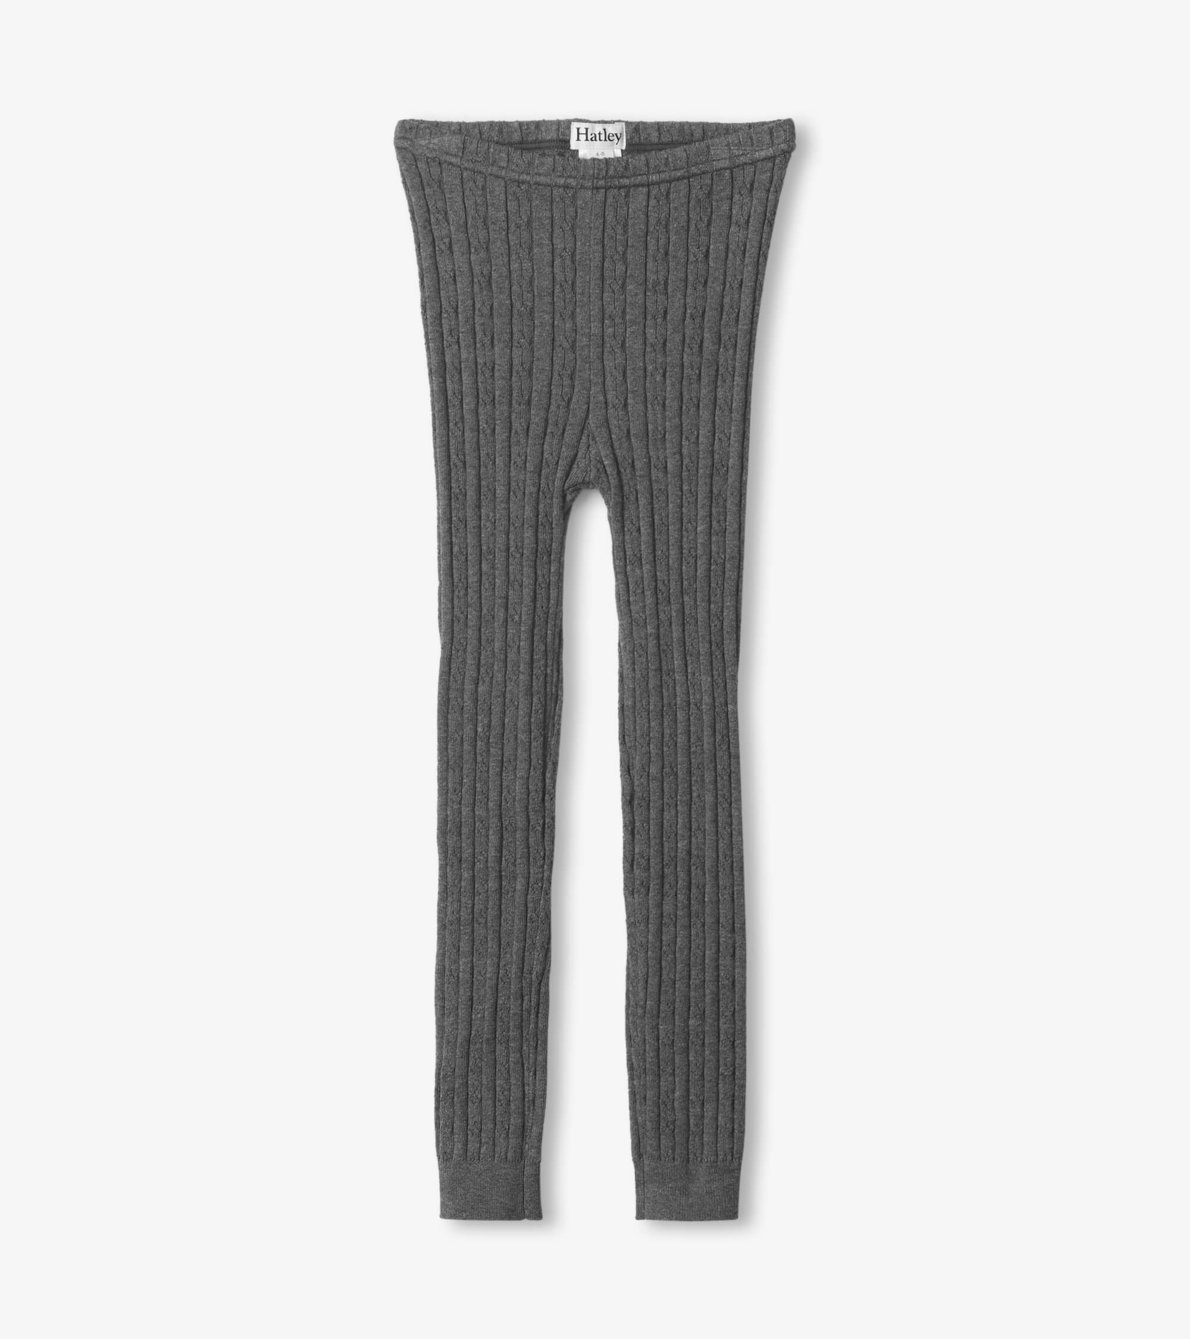 View larger image of Girls Charcoal Cable Knit Tights